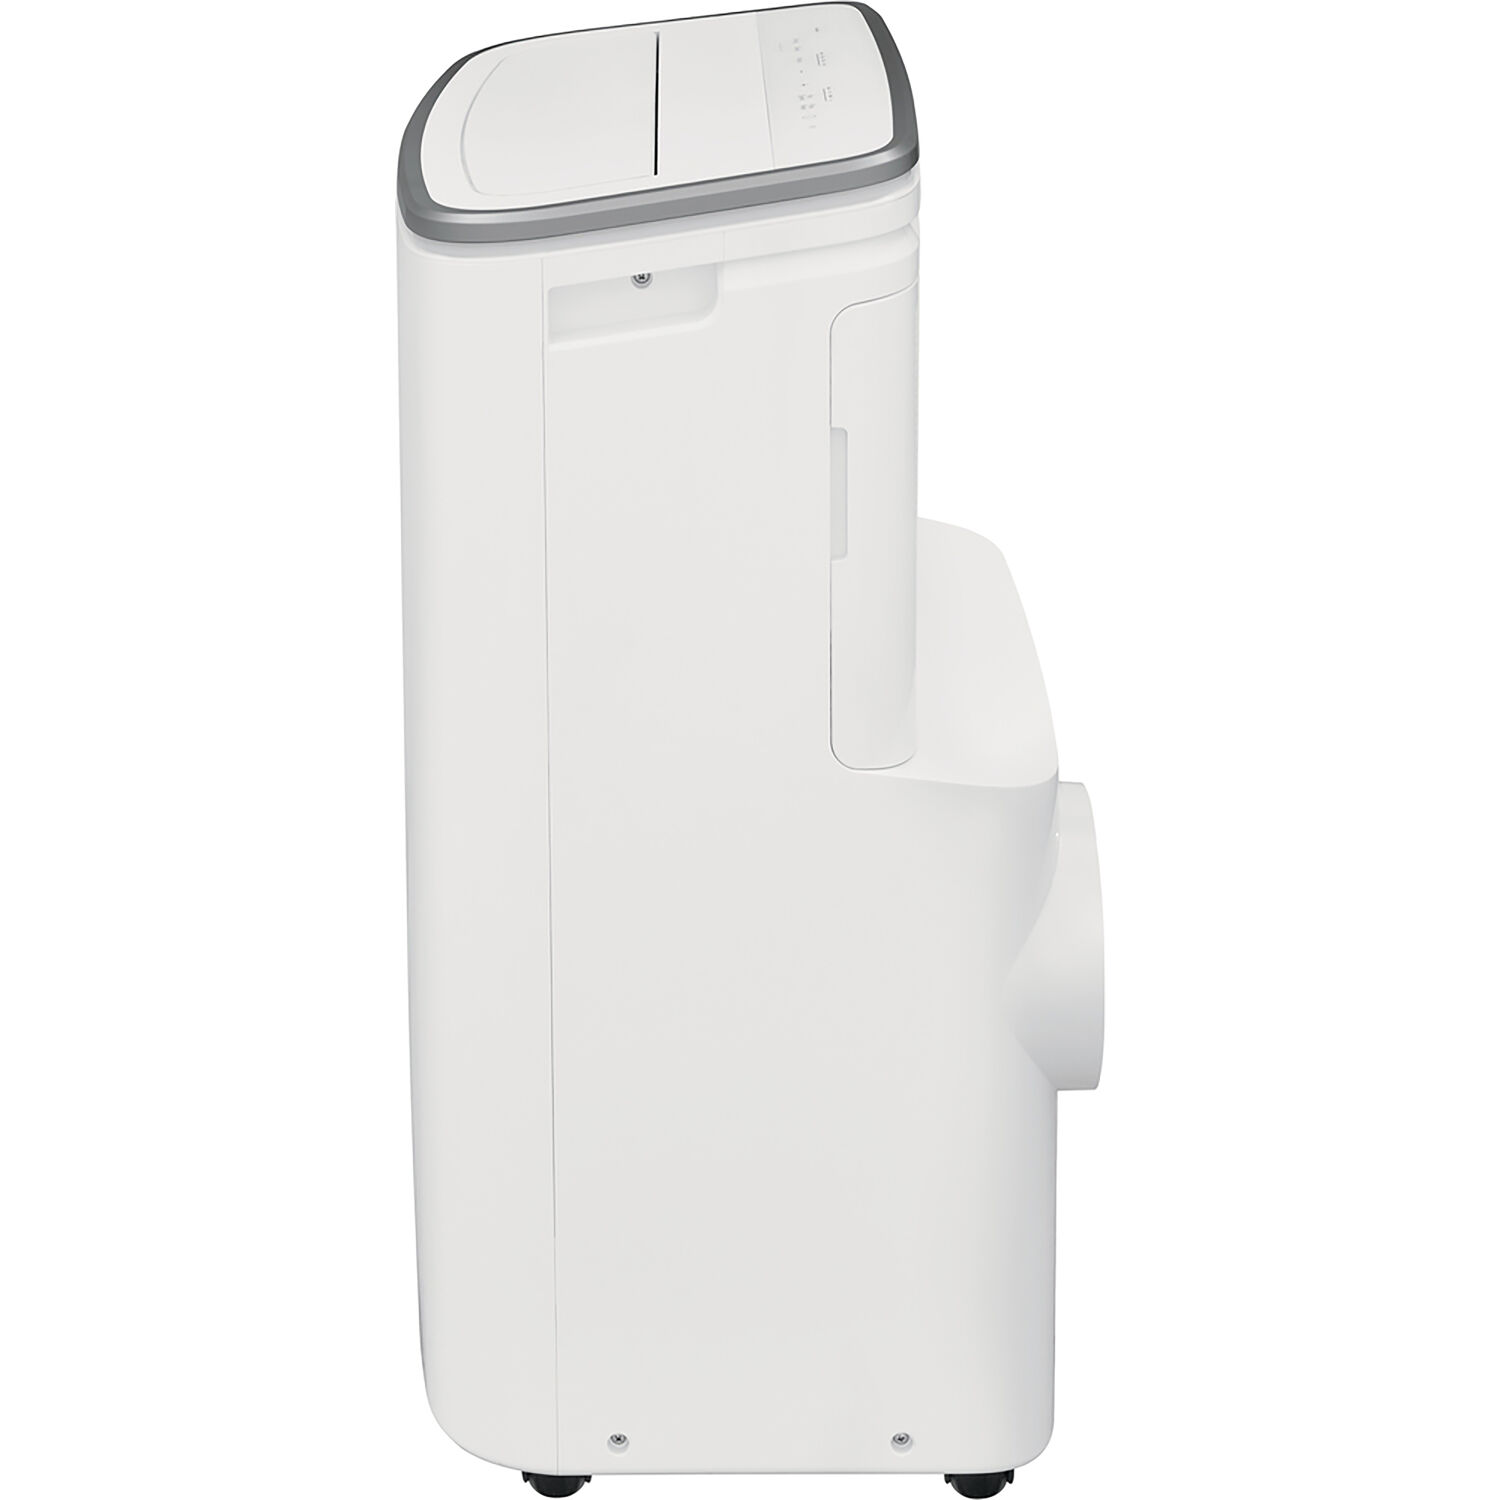 Frigidaire Cool Connect Smart Portable Air Conditioner with Wi-Fi Control for a Room up to 600-Sq. Ft. - image 10 of 14